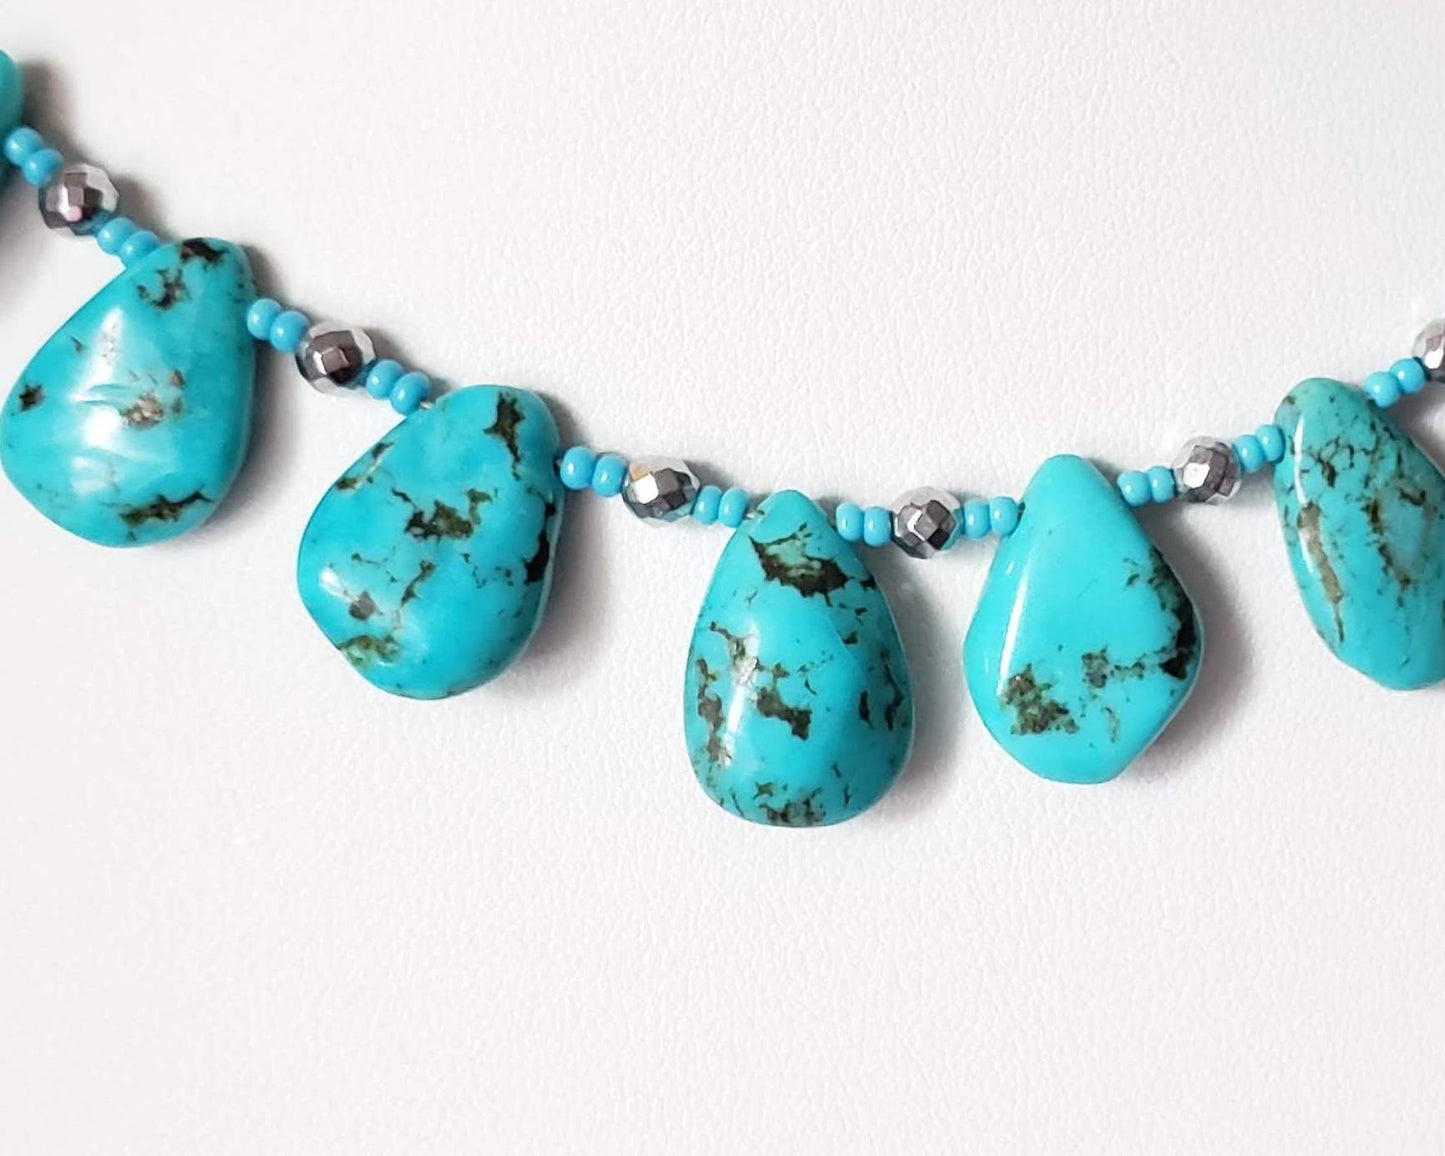 Turquoise Beaded Collar Necklace with blue Turquoise Drop Shaped Stones, sparkly silver Hematite beads and tiny glass seed beads, on white display and background 